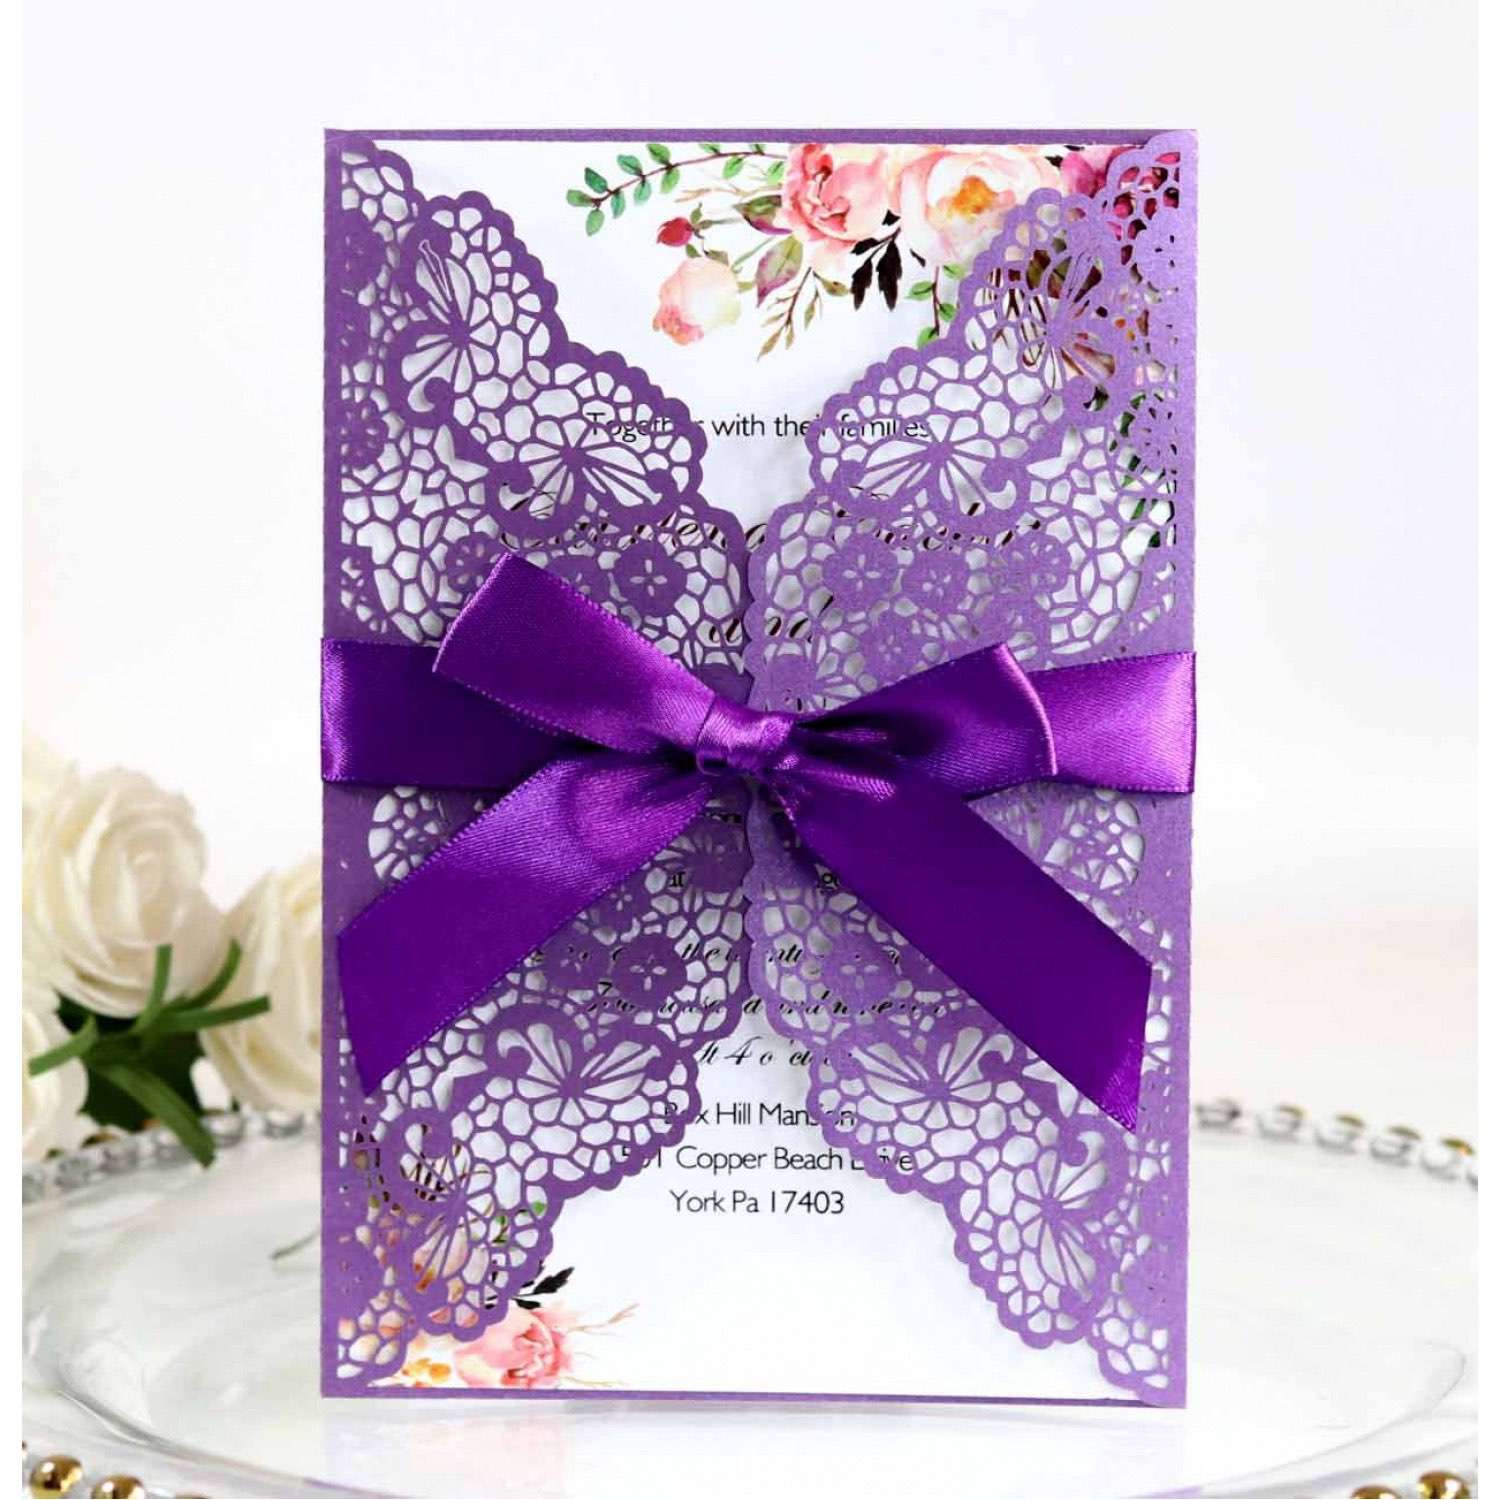 Thanksgiving Day Invitation Card Lace Marriage Invitation Laser Cut Wedding Card